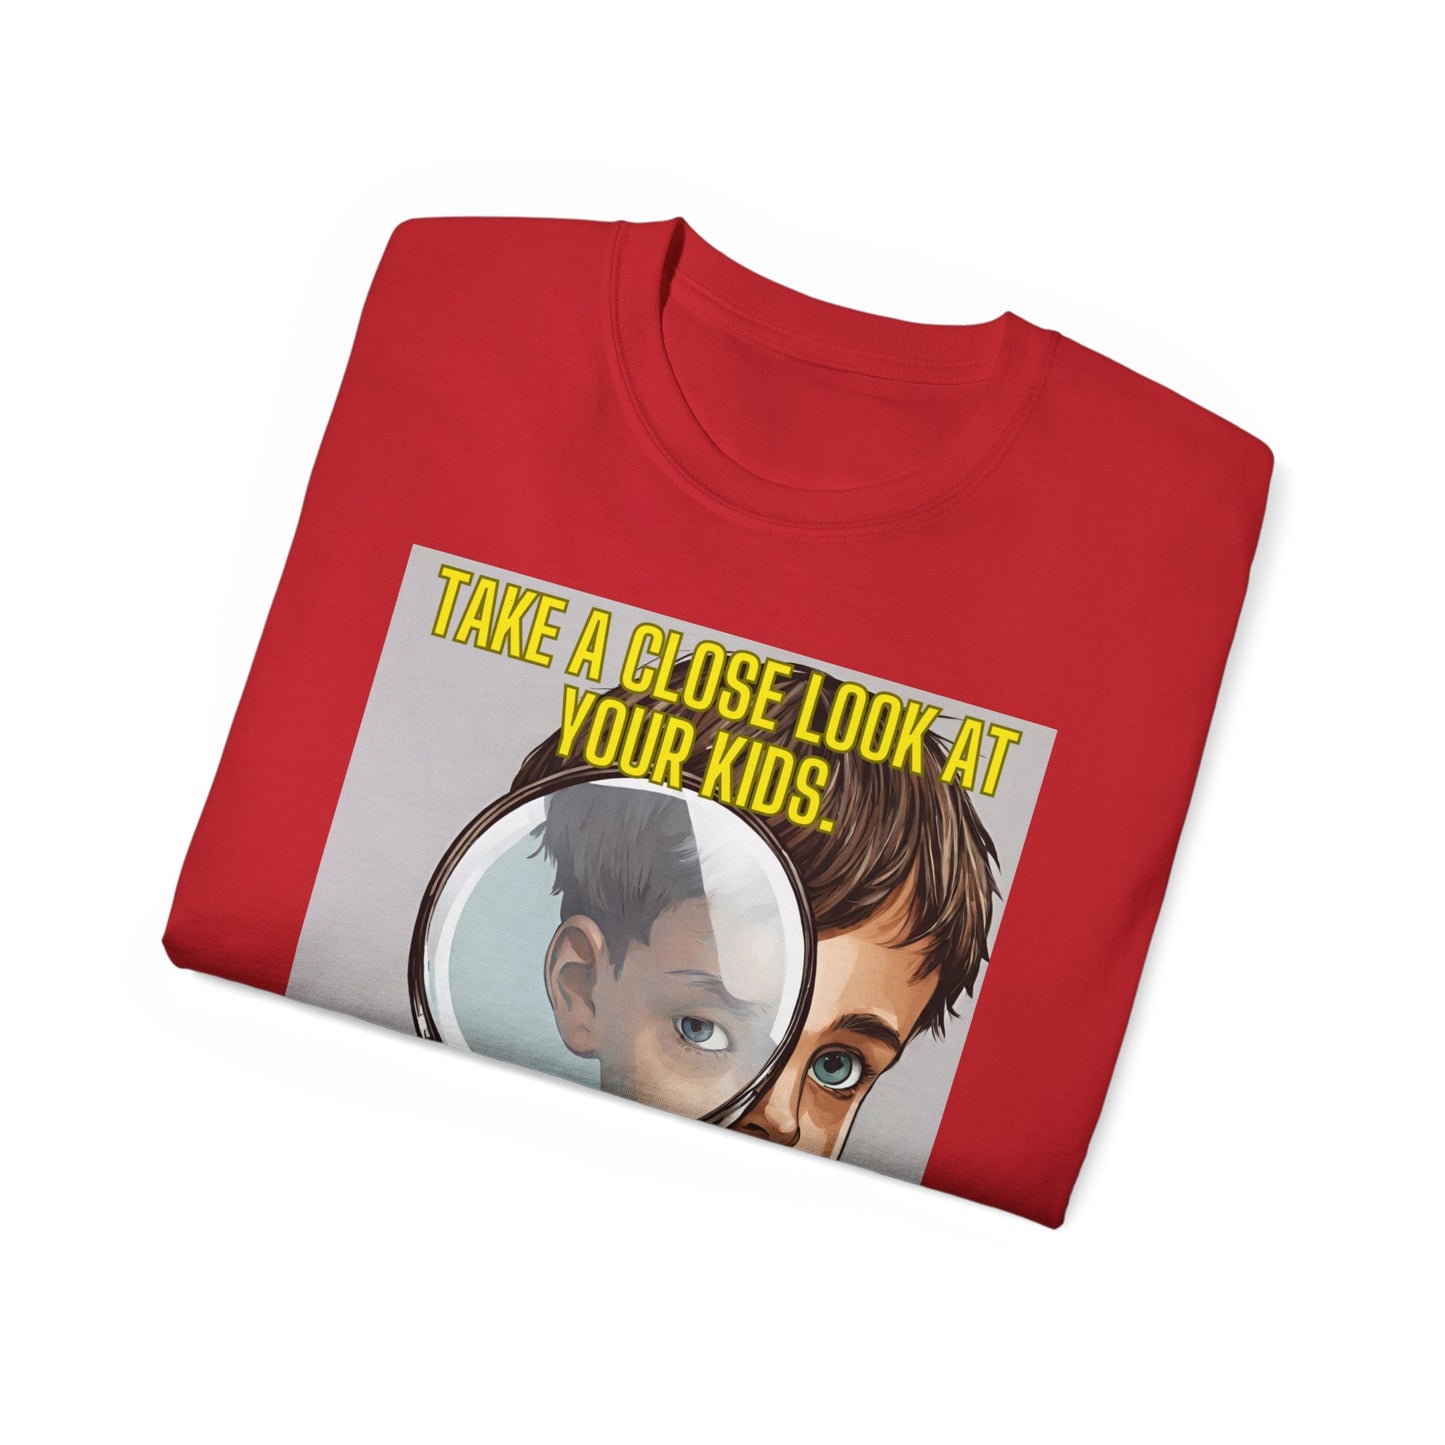 Unisex Ultra Cotton ( Close Look at Your Kids) T-shirt